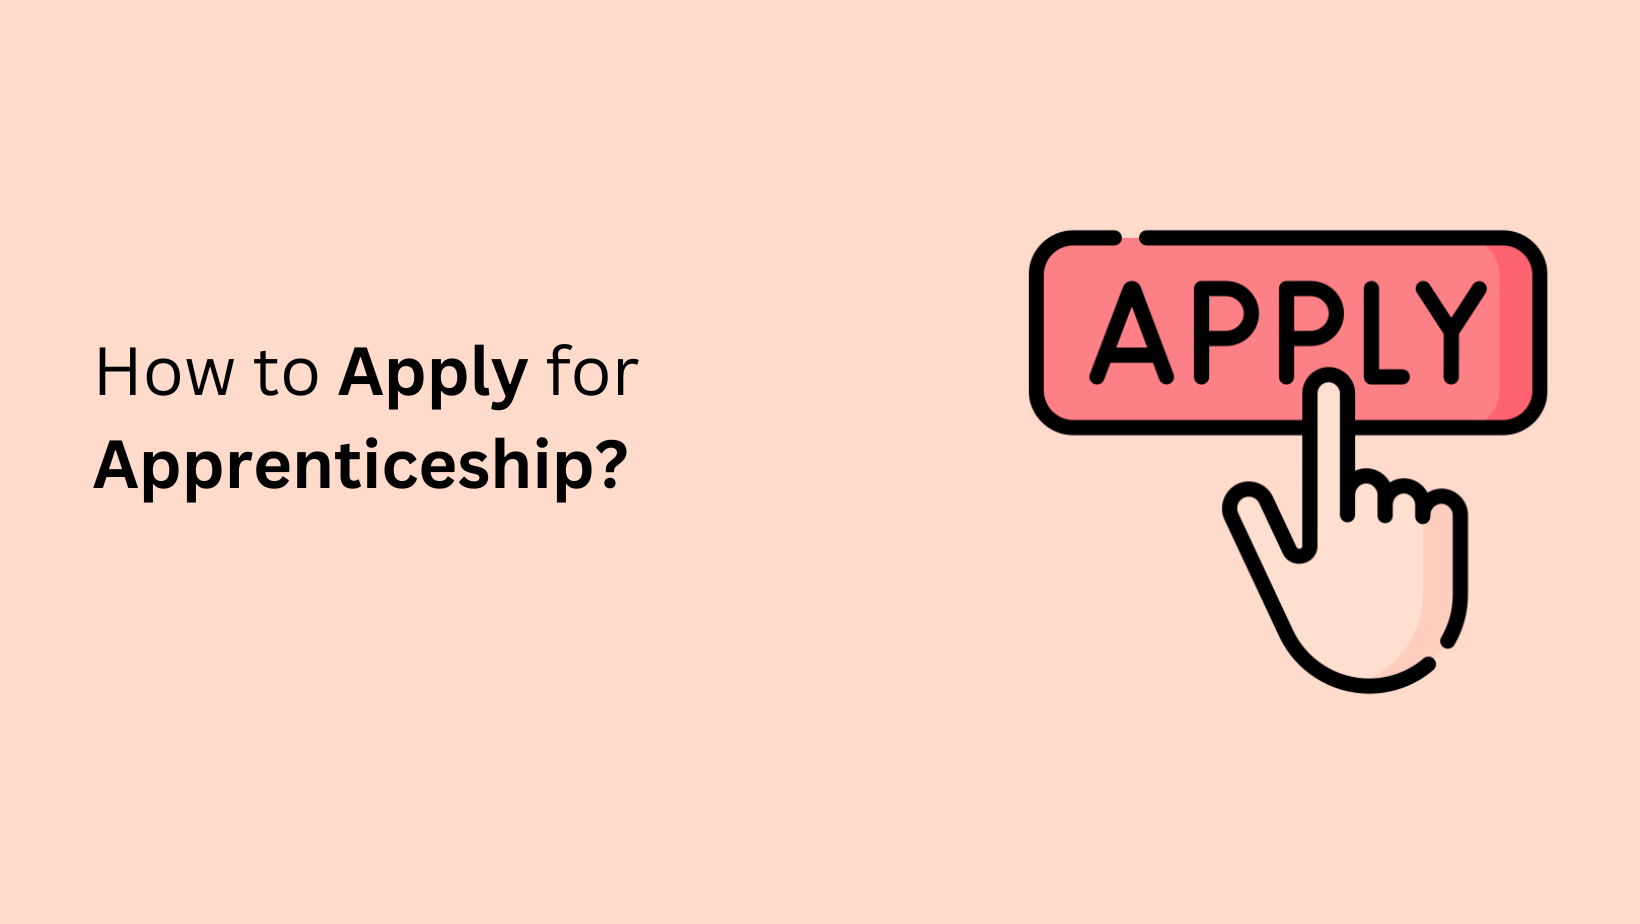 How to Apply for Apprenticeship